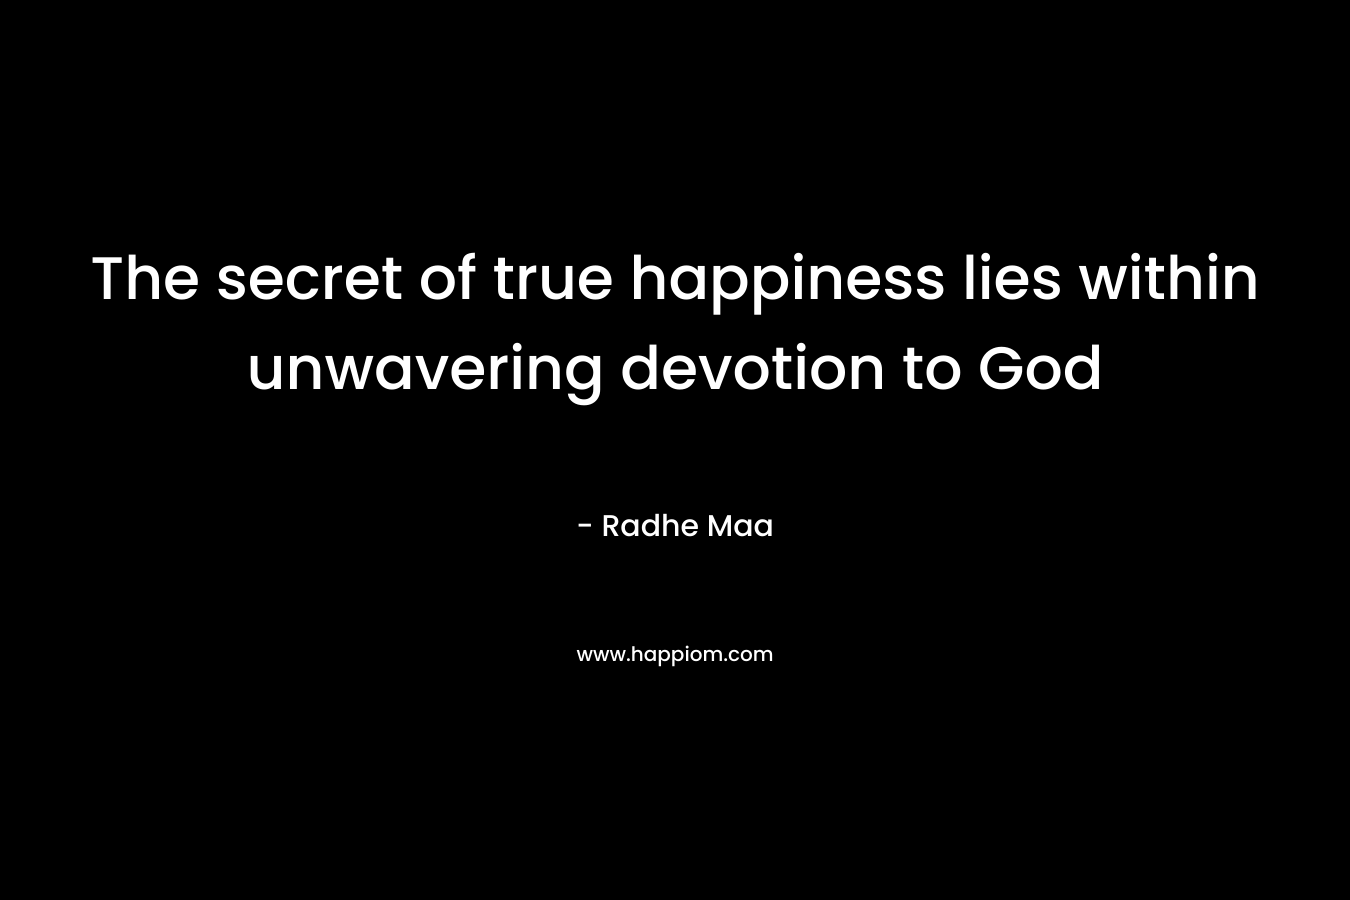 The secret of true happiness lies within unwavering devotion to God – Radhe Maa